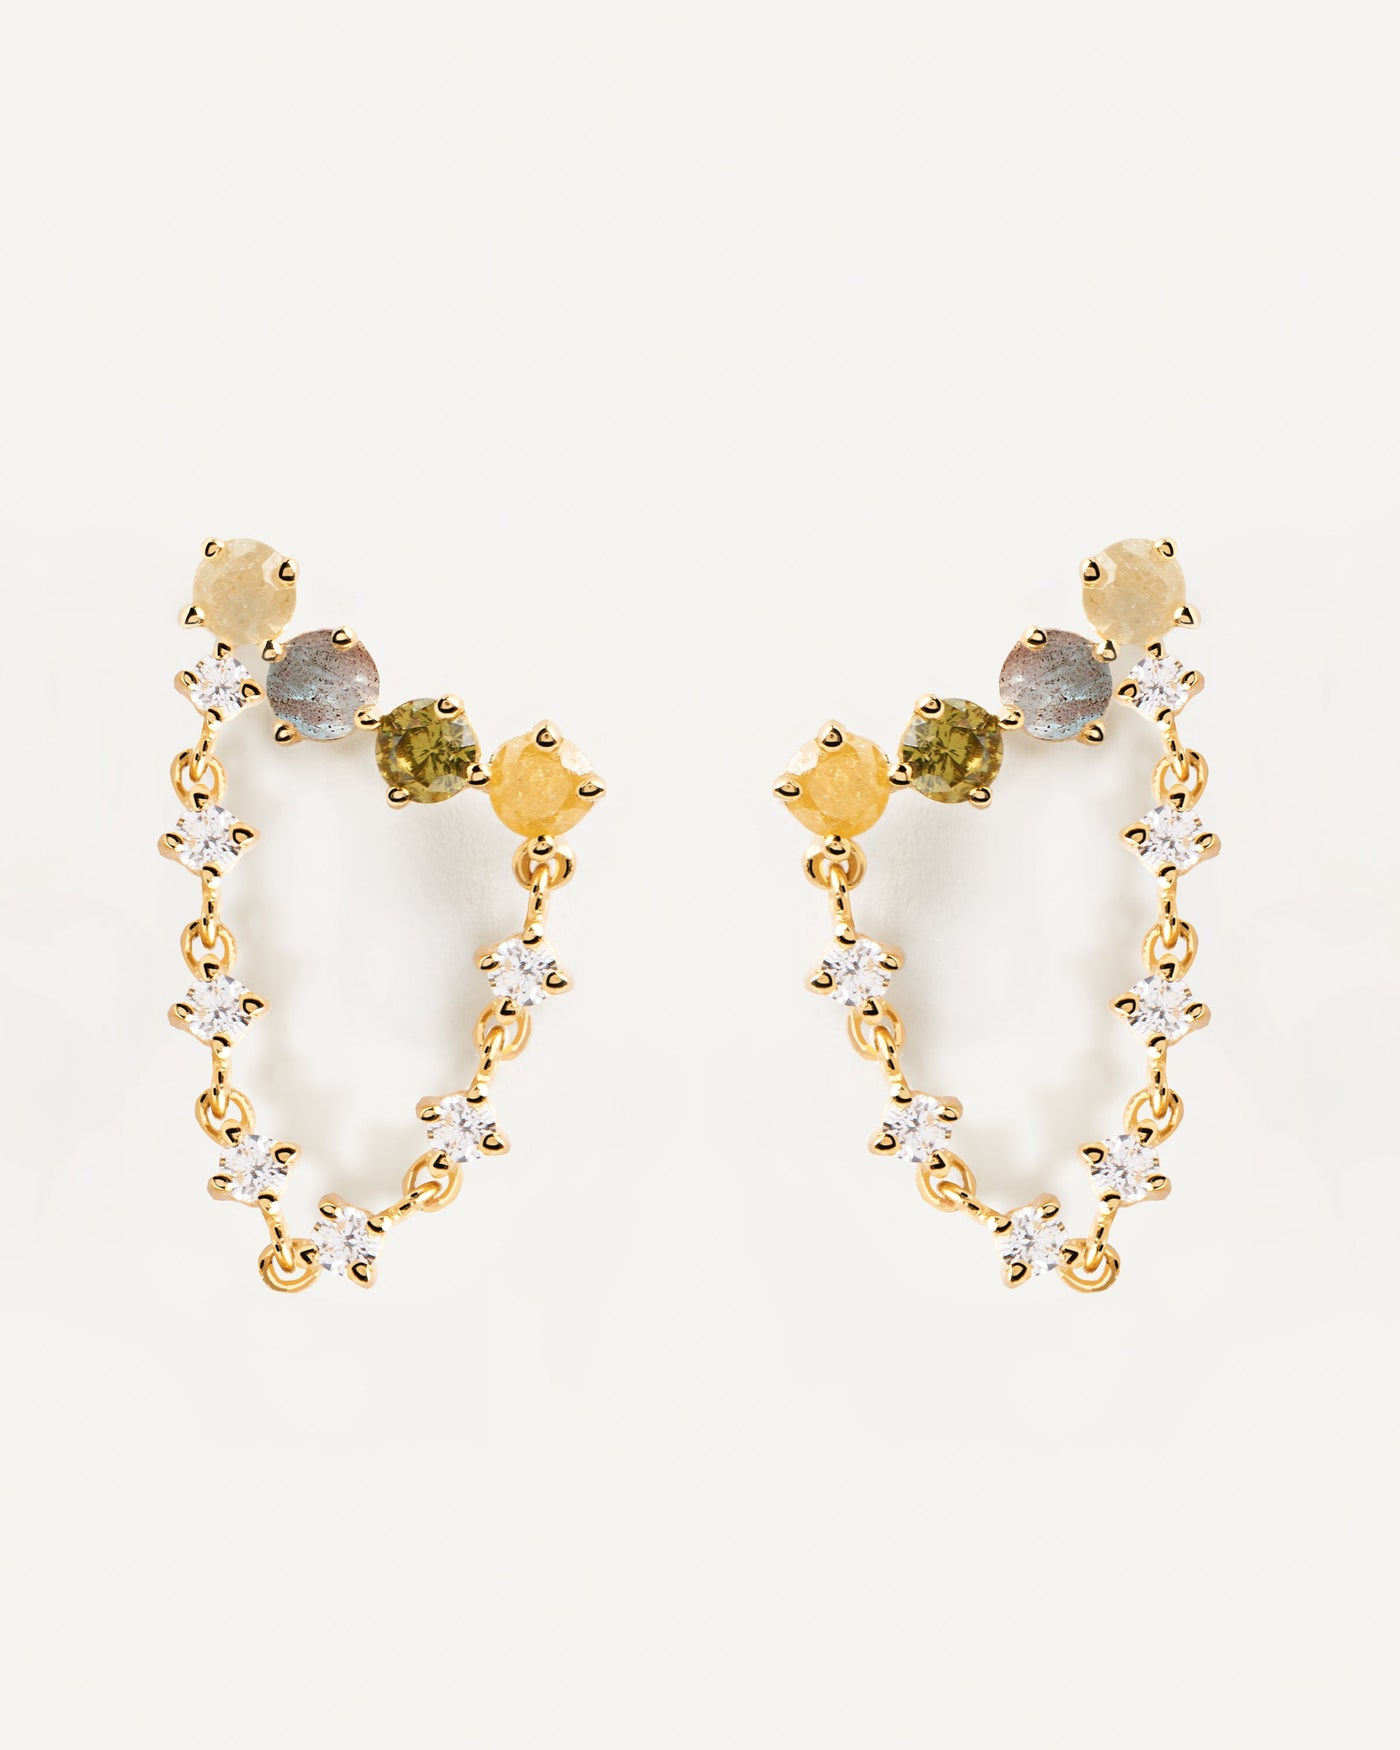 2023 Selection | Juno Earrings. Dainty chain earrings with multicolor gemstones. Get the latest arrival from PDPAOLA. Place your order safely and get this Best Seller. Free Shipping.